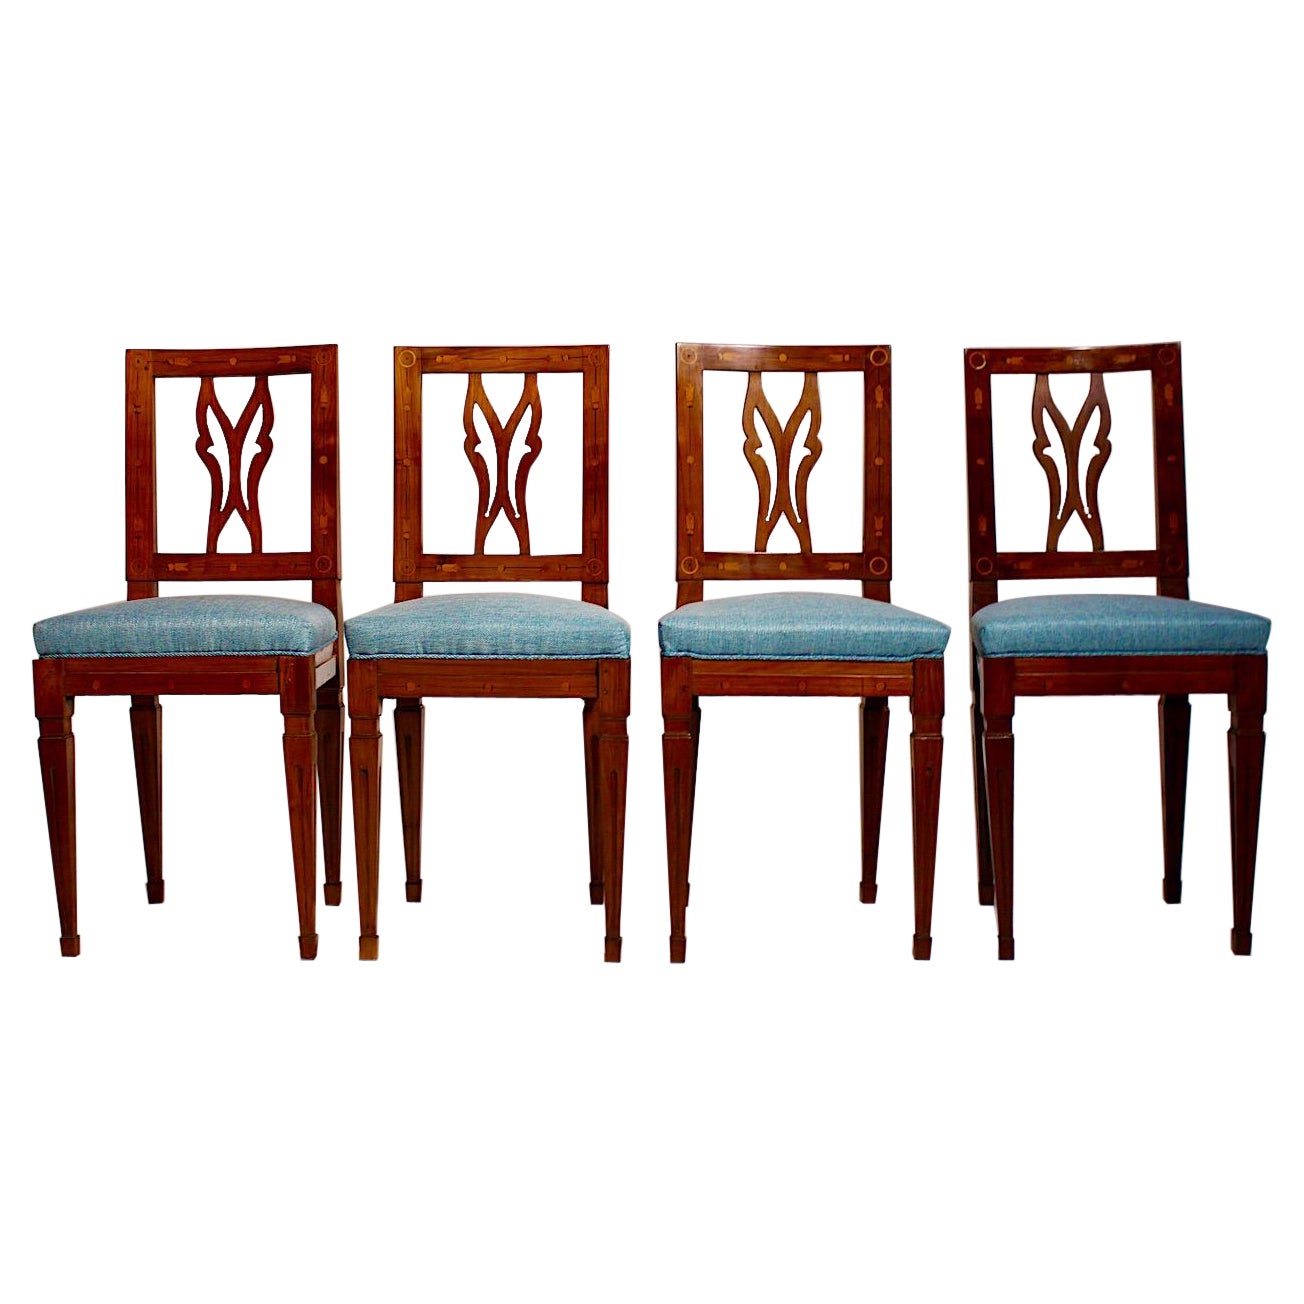 Cherrywood Maple Blue Upholstery Dining Chairs Set of Four circa 1780 Austria